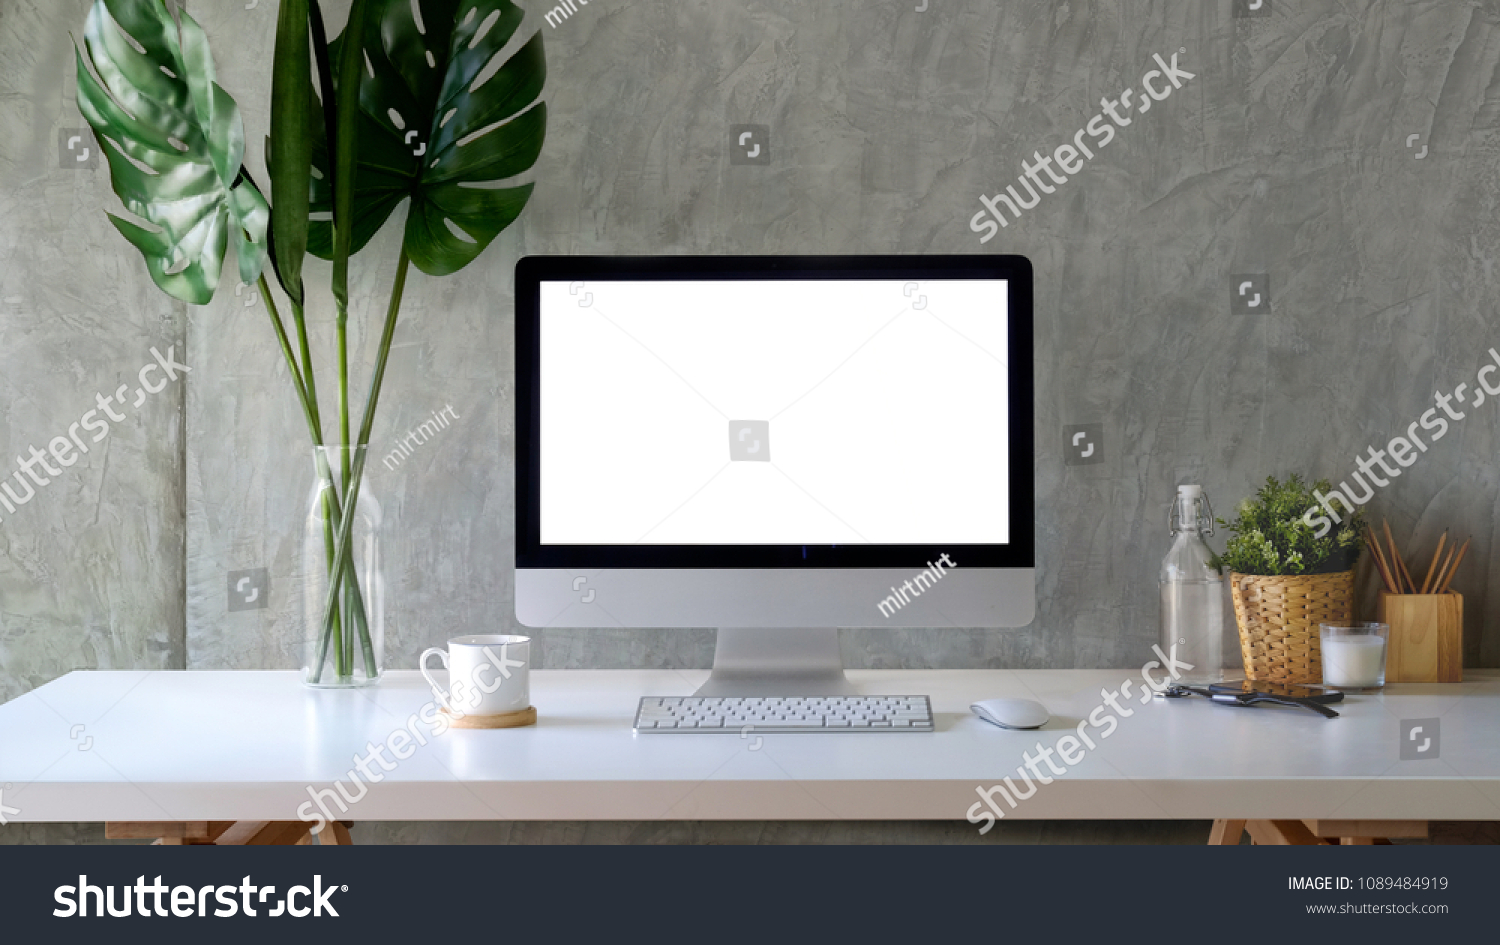 Workspace mockup desktop computer and stuff on white wooden table. #1089484919